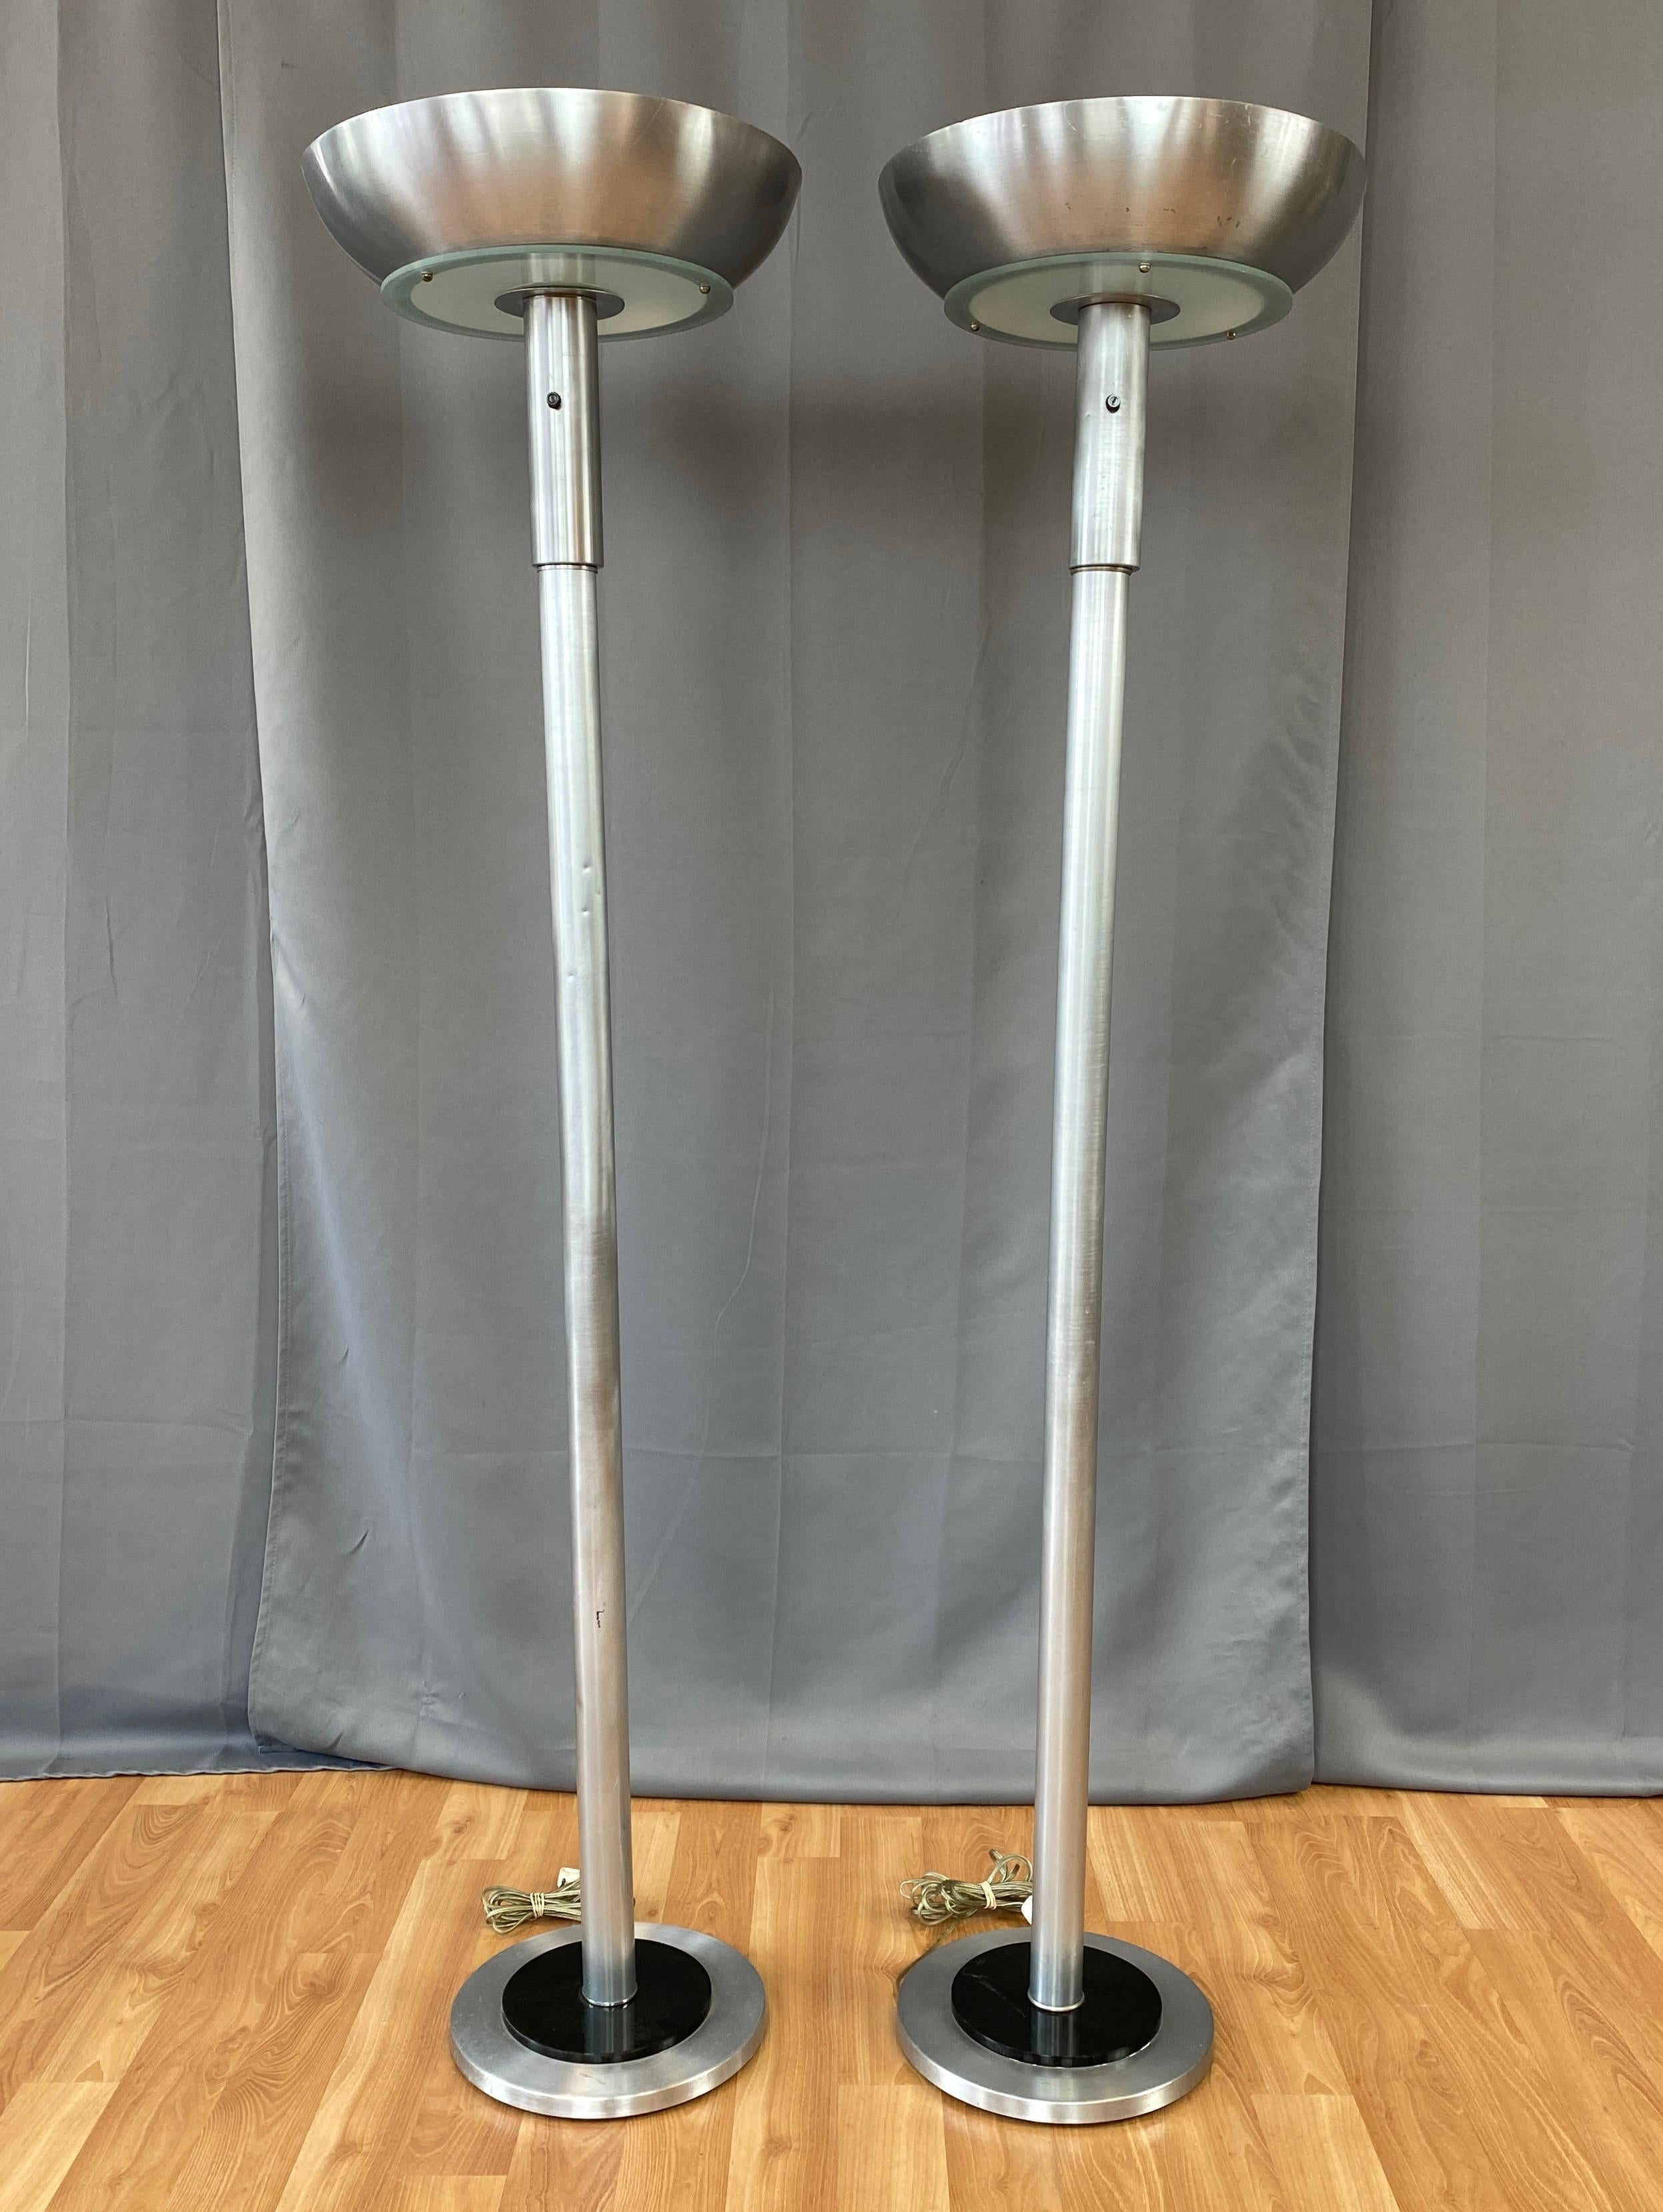 A handsome pair of uncommon mid-1940s Russel Wright-style Machine Age or Art Deco aluminum torchiere floor lamps.

Broad and deep spun aluminum bowl top with open bottom upon a frosted glass diffuser. Well-proportioned spun and brushed aluminum